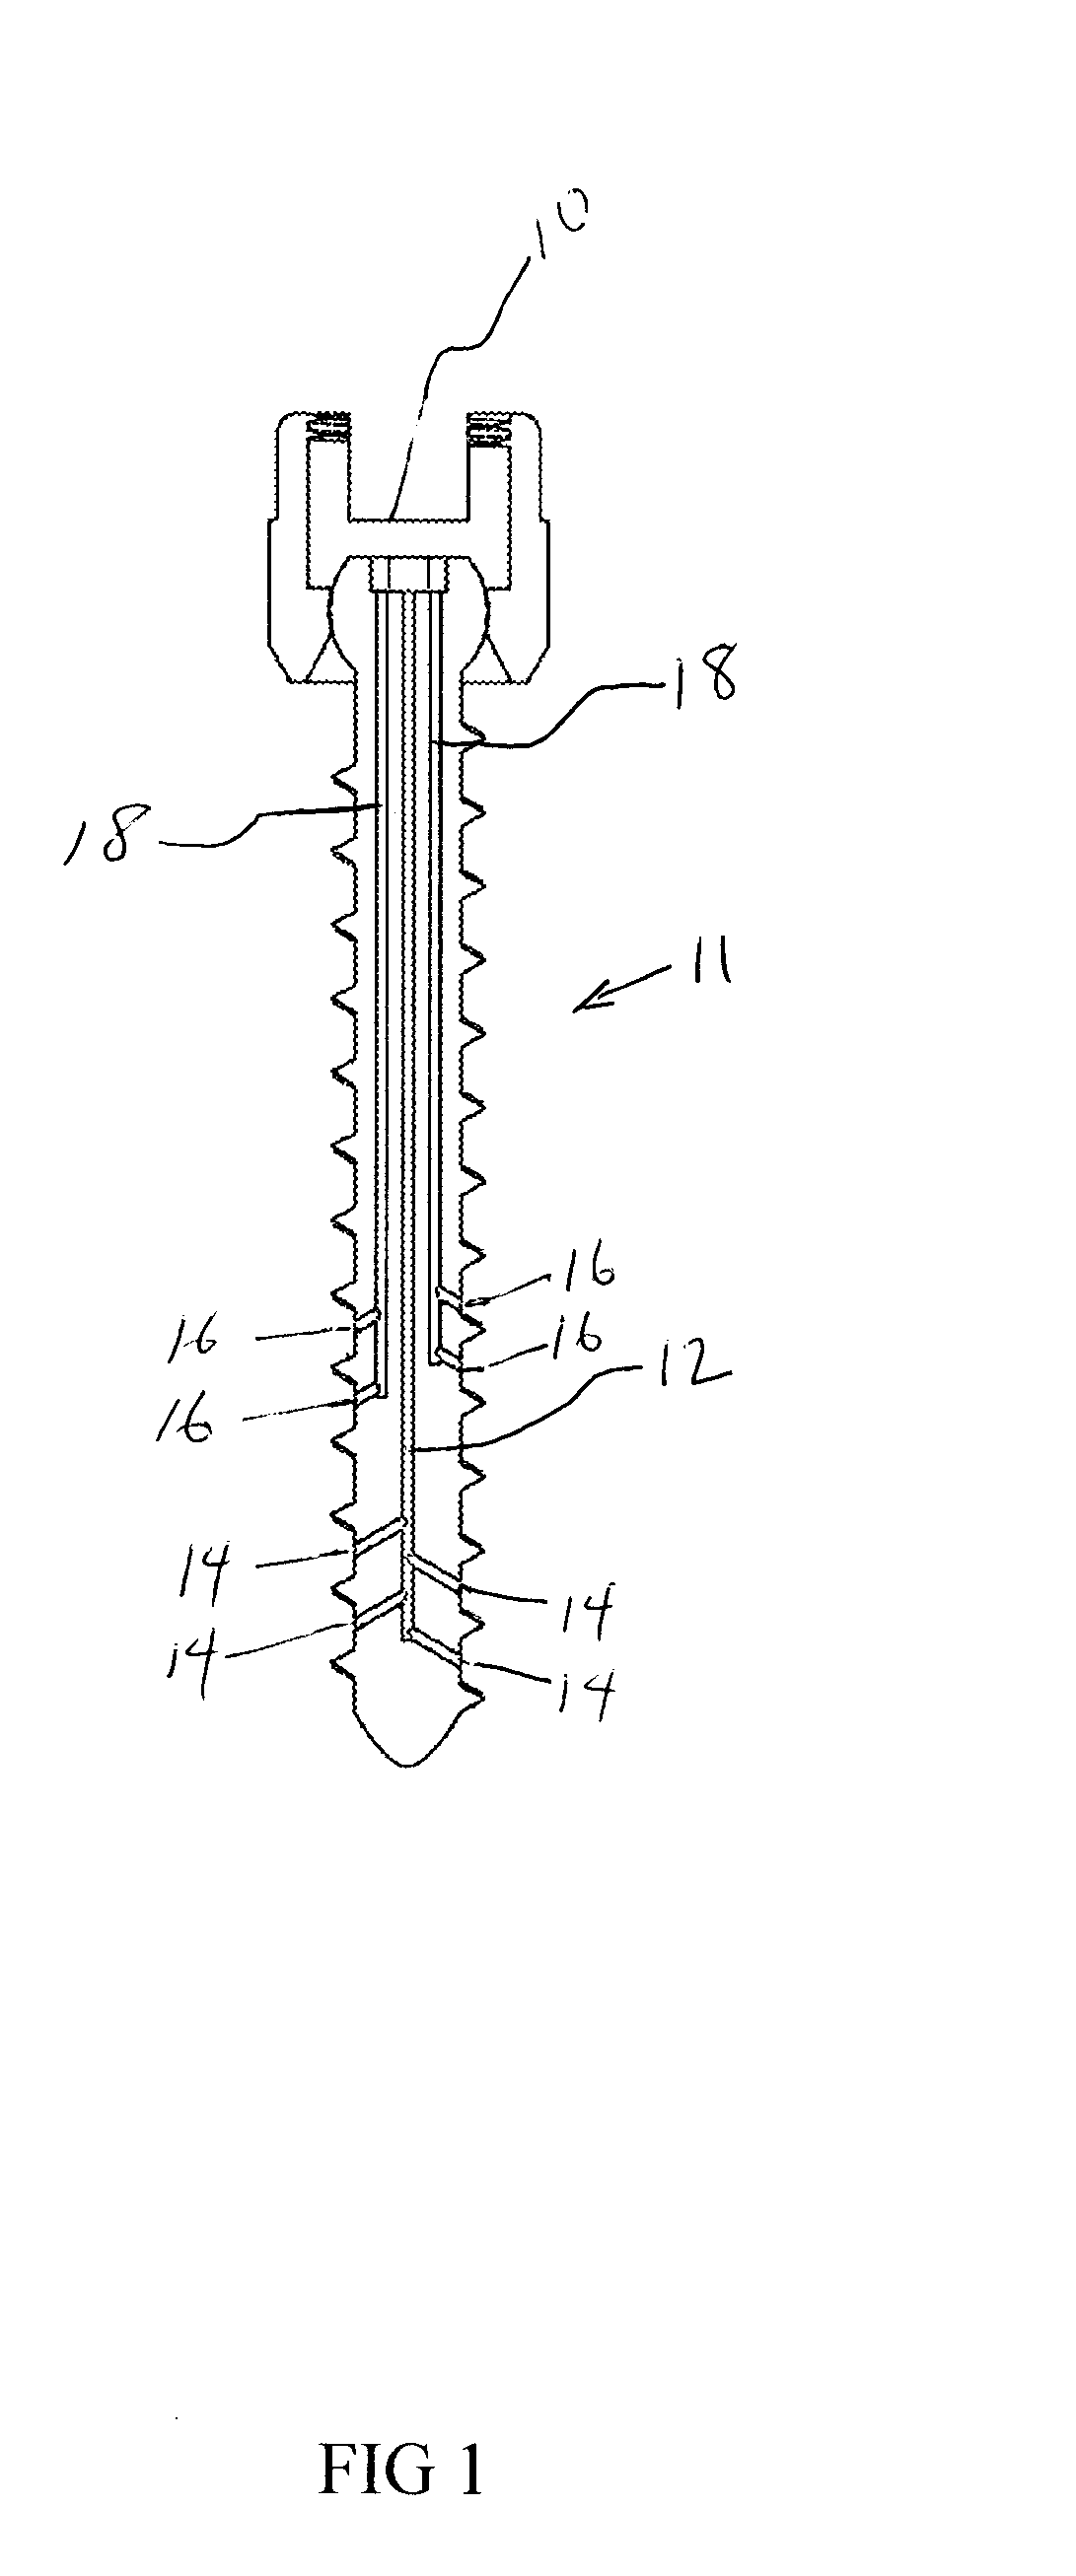 Venting/pressure adjustment to aid in delivery of material into an anatomic region via a cannula